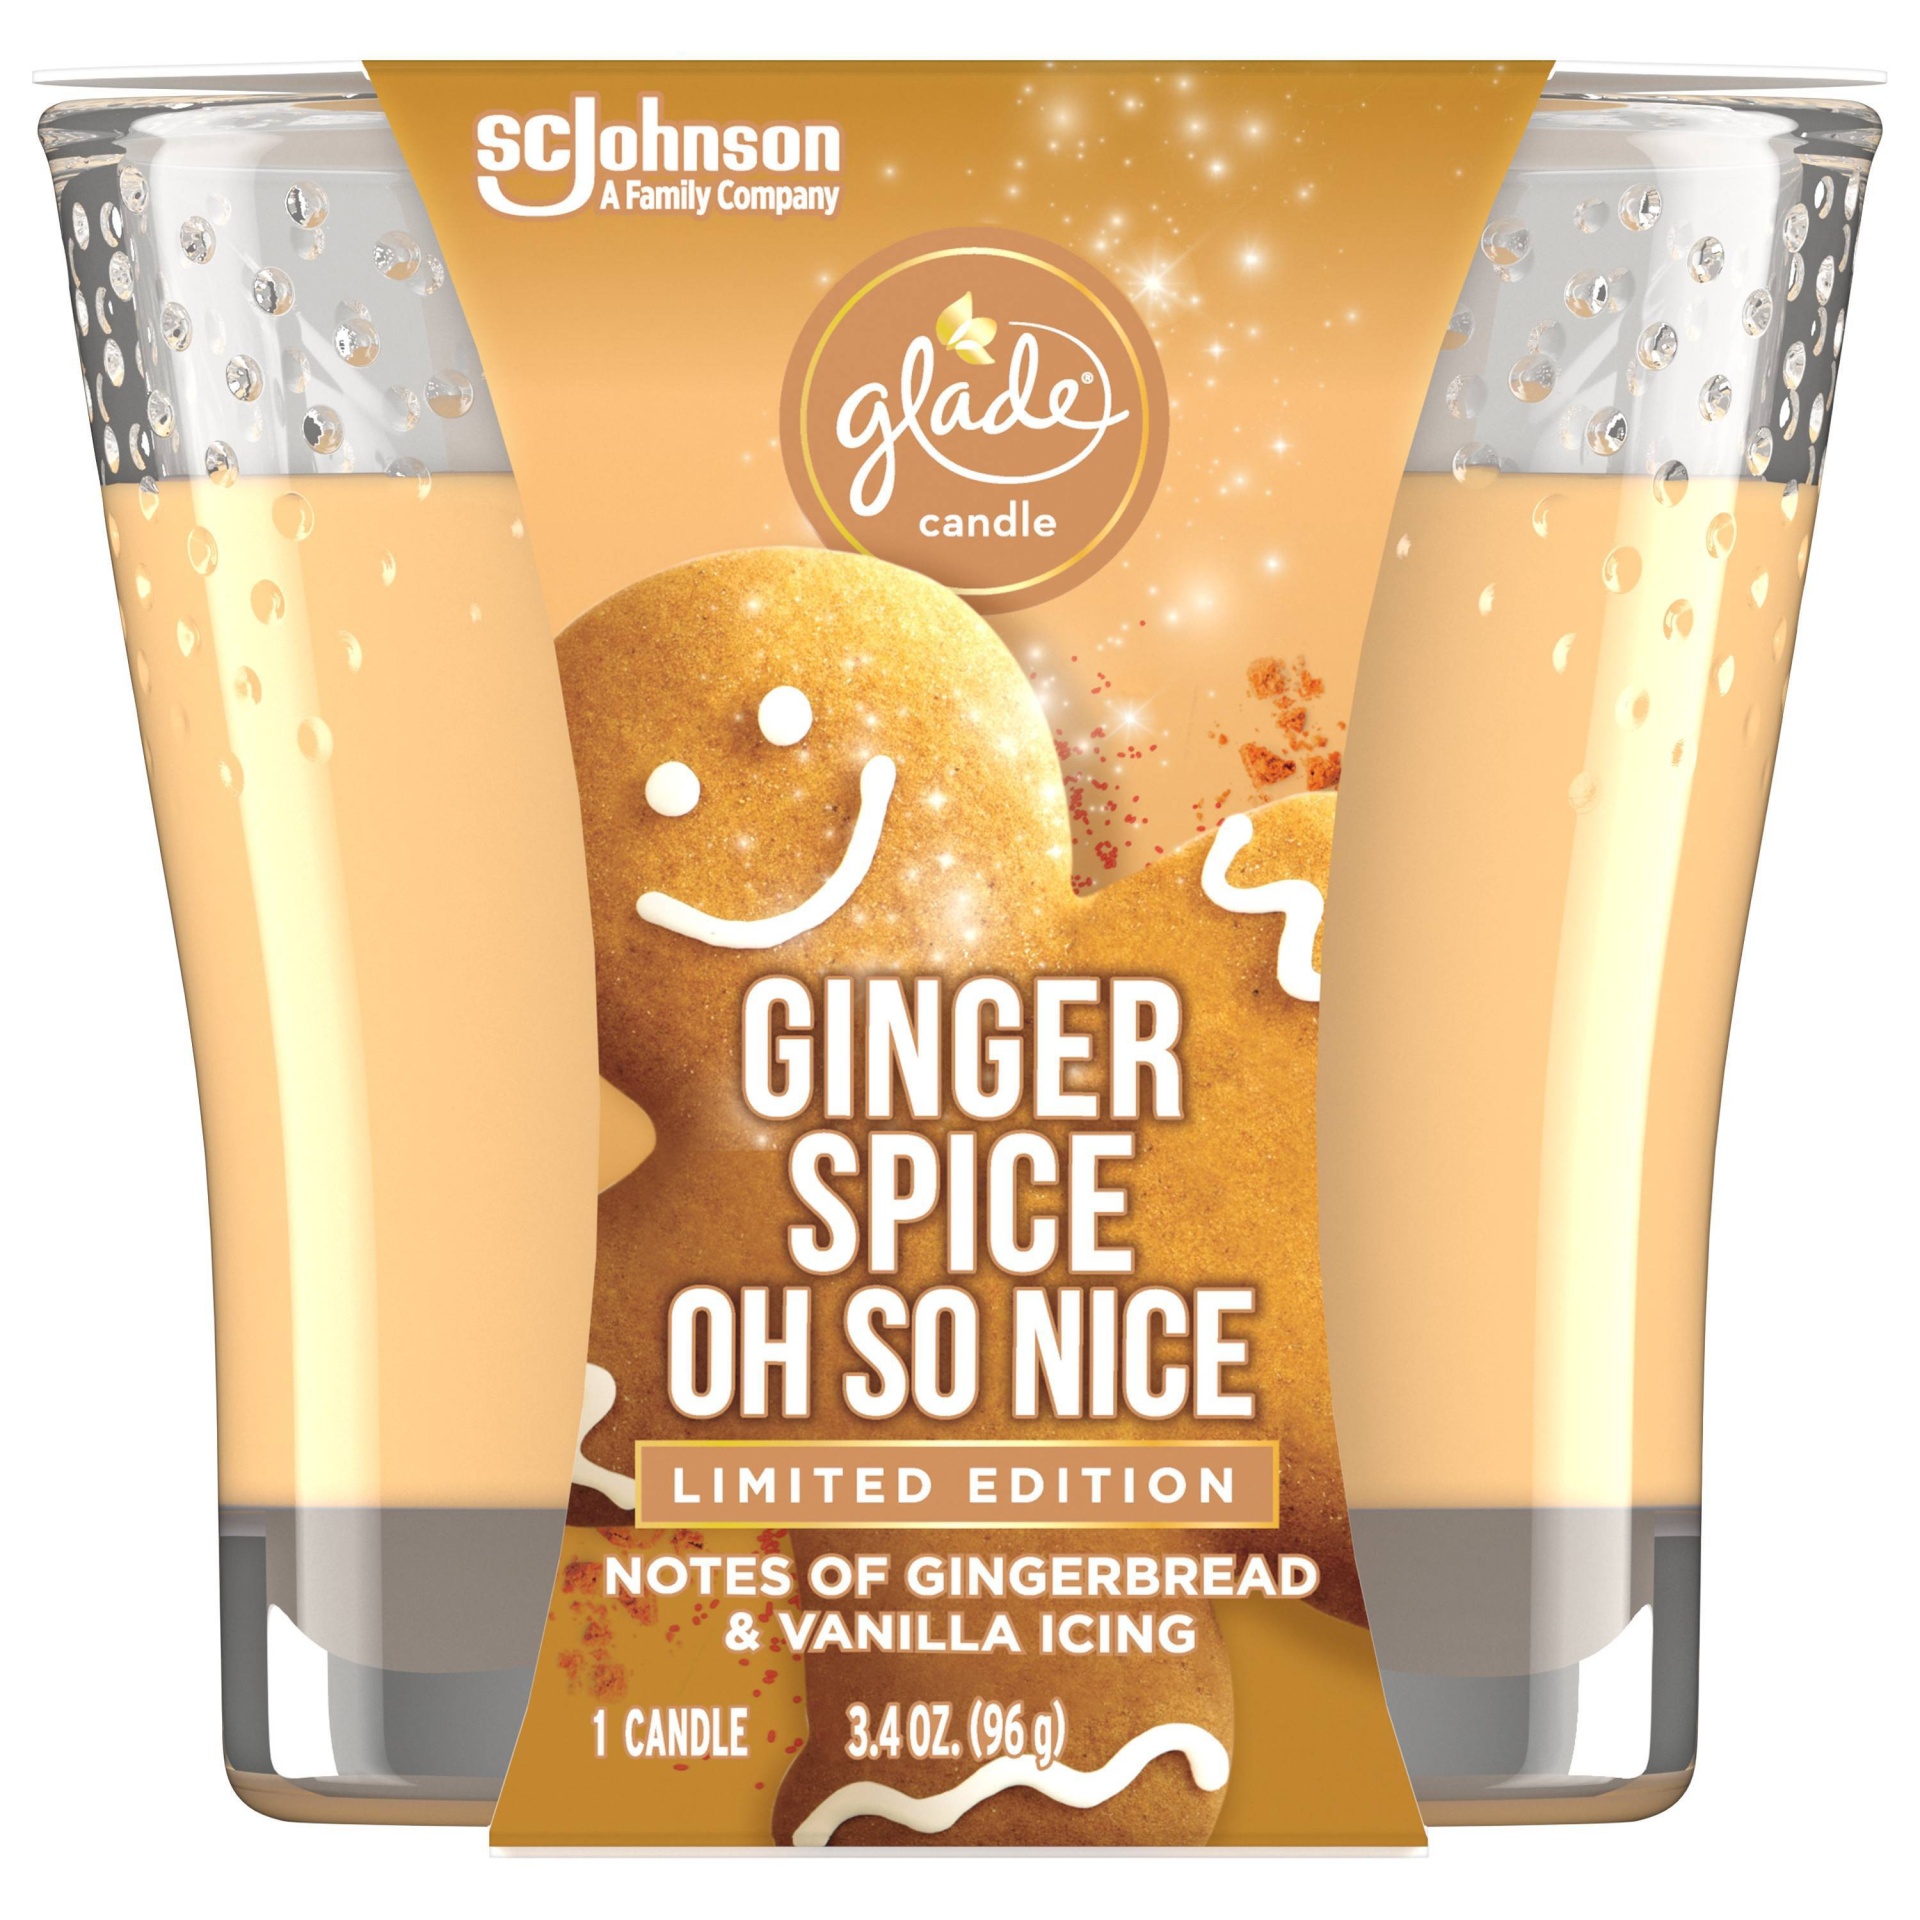 slide 1 of 5, Glade Candle - Ginger Spice Oh So Nice, 3.4 oz